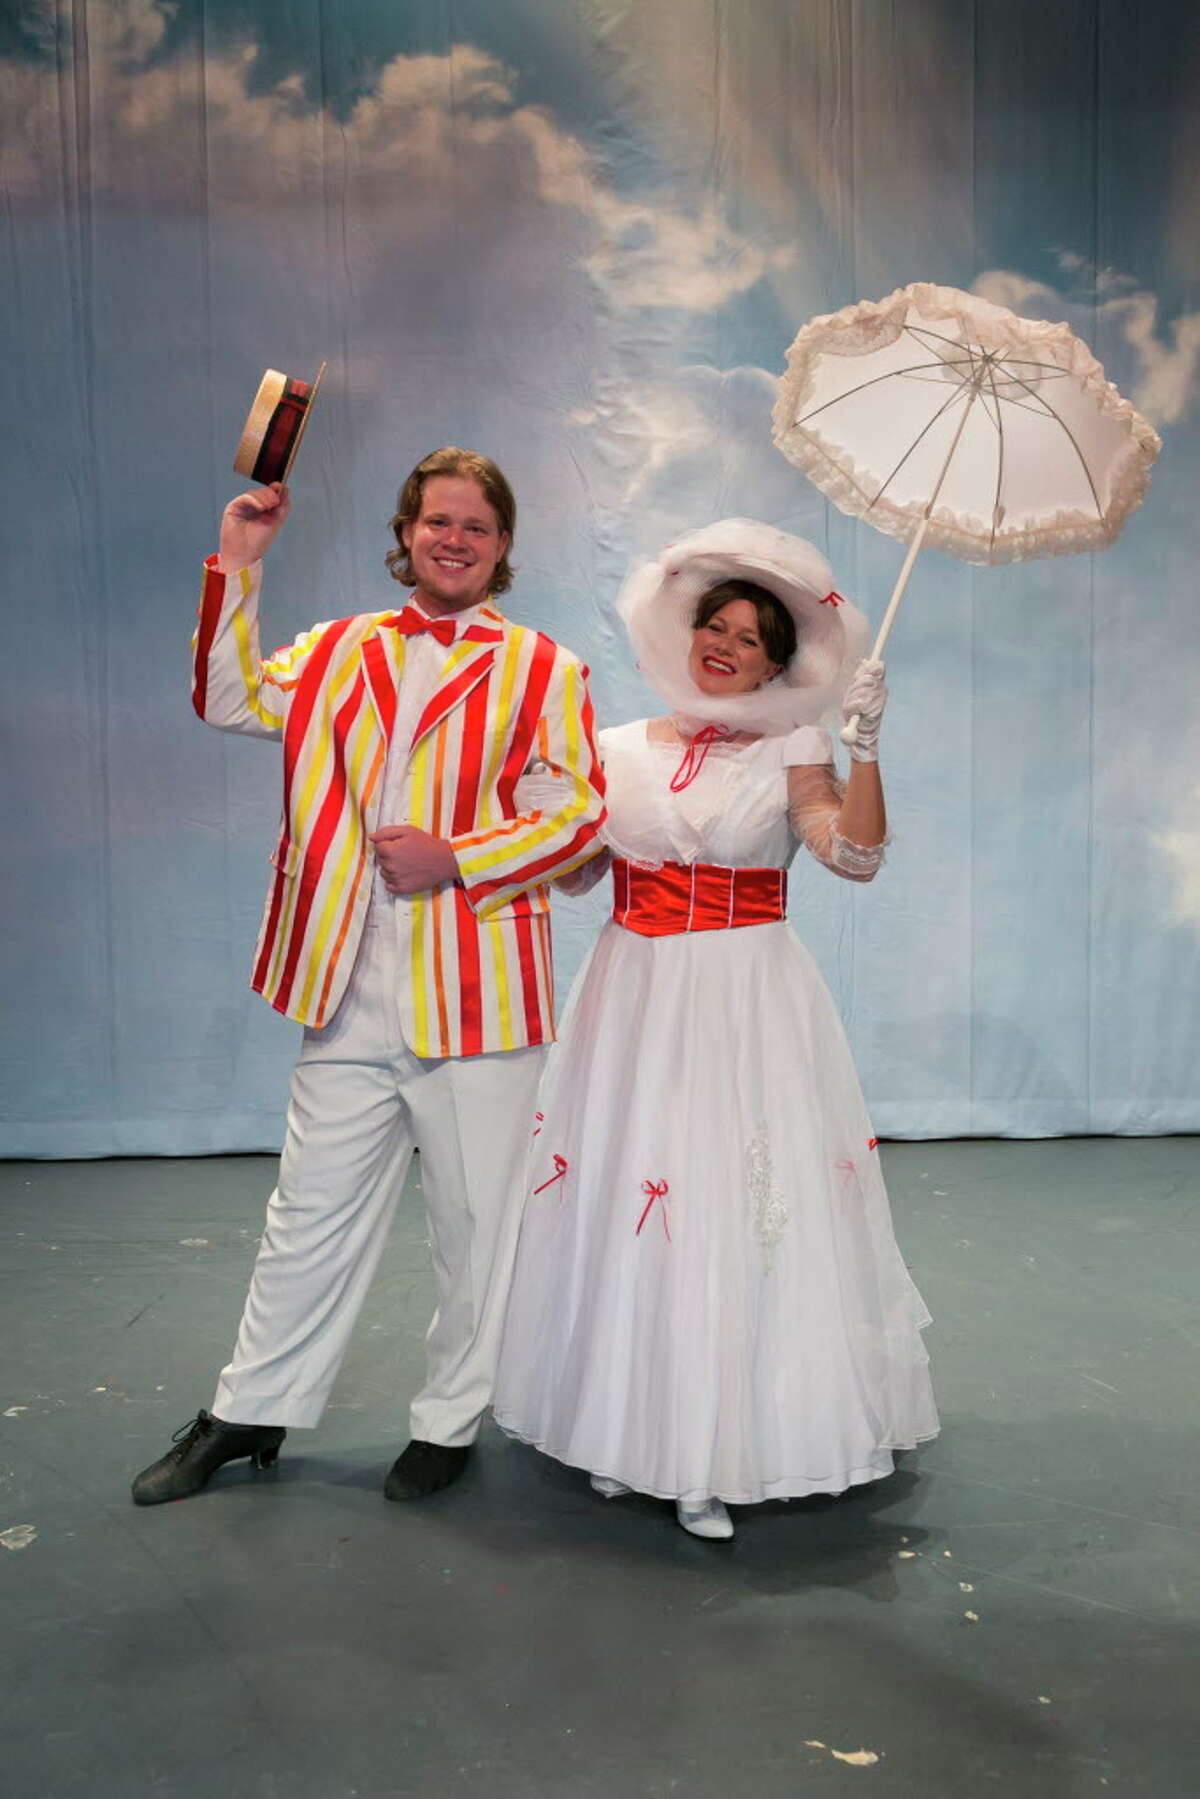 Stage Right has added a 2 p.m. matinee for this Saturday of "Mary Poppins" at the Crigton Theatre in downtown Conroe.